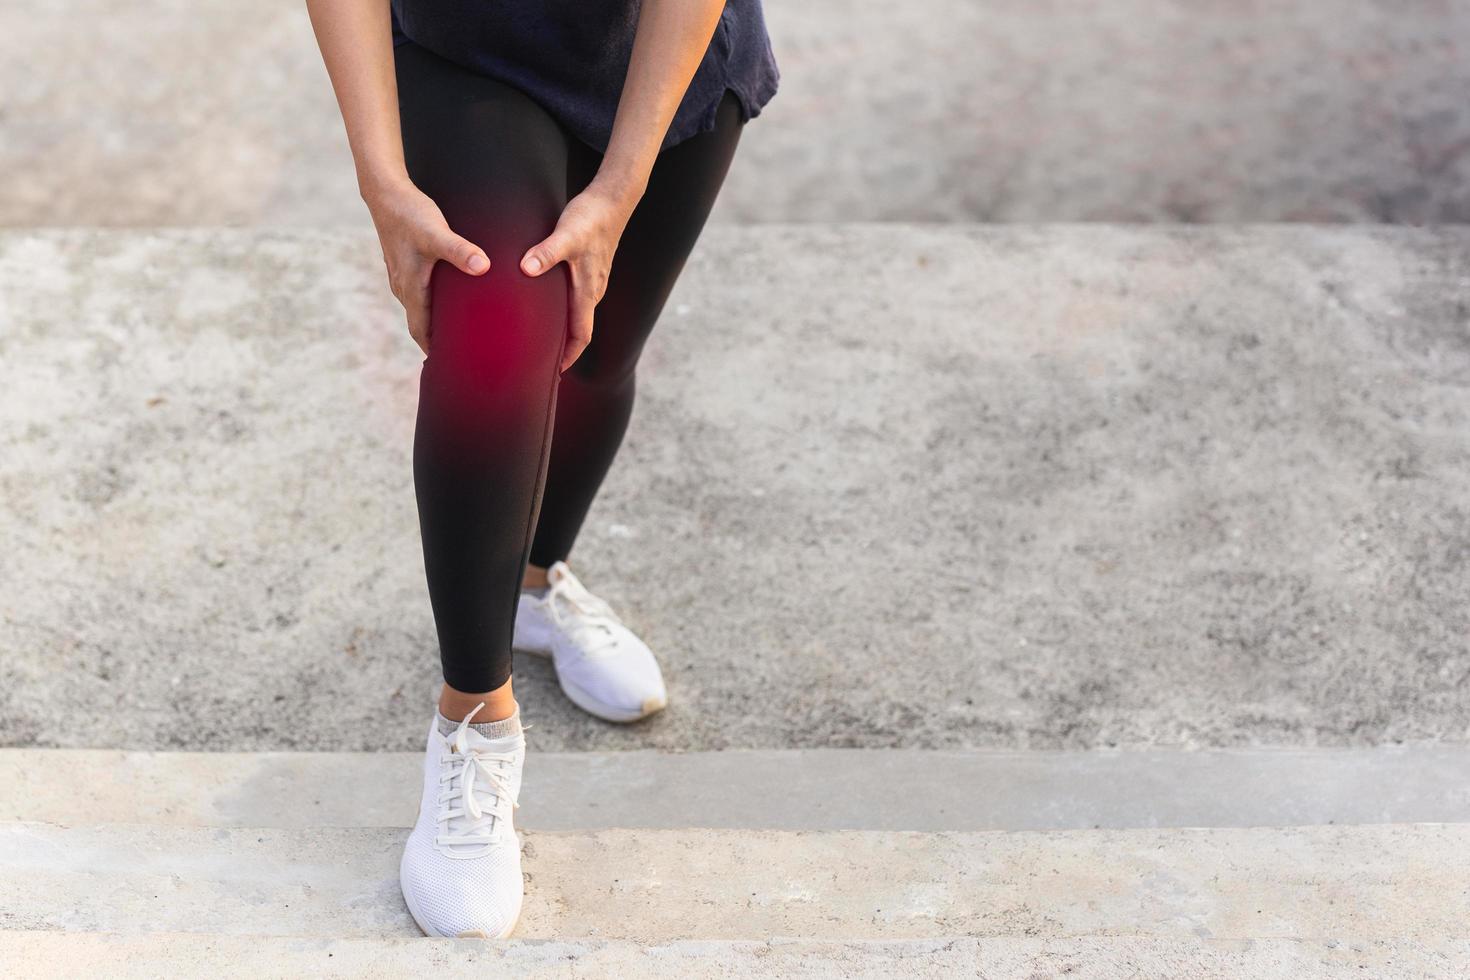 Women got knee pain while exercise walking up the stairs. photo